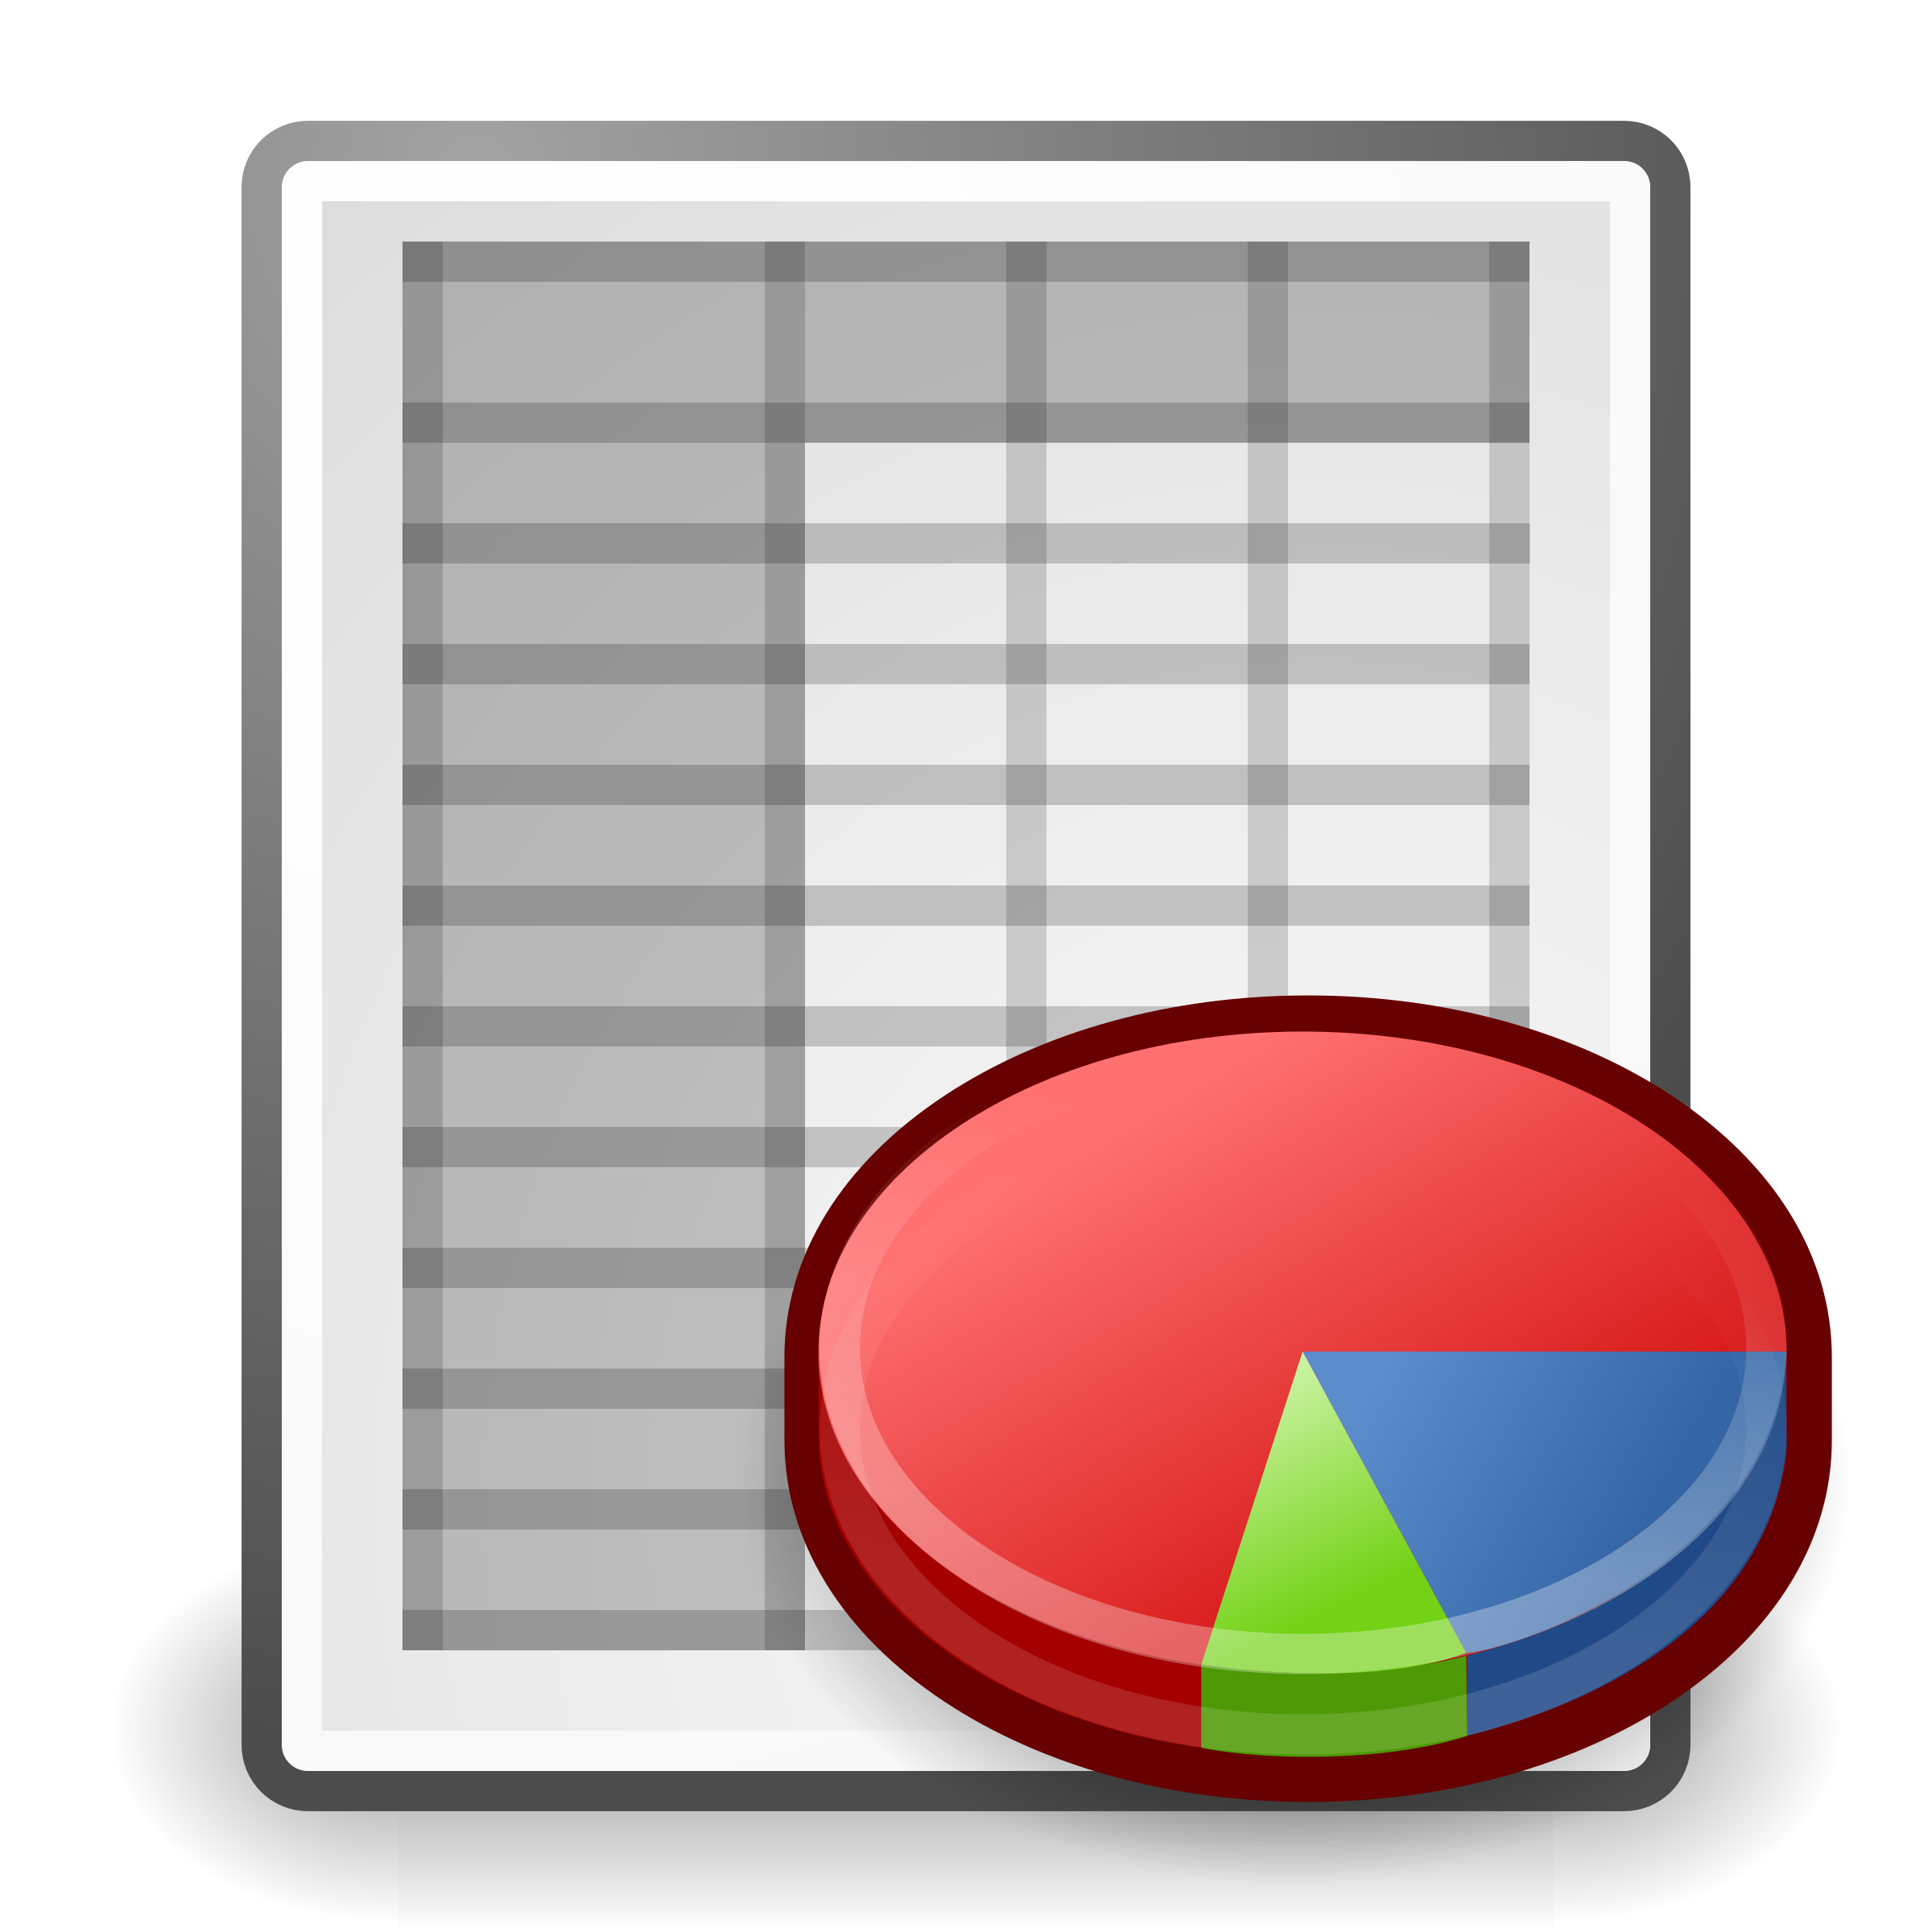 clipart excel download - photo #10